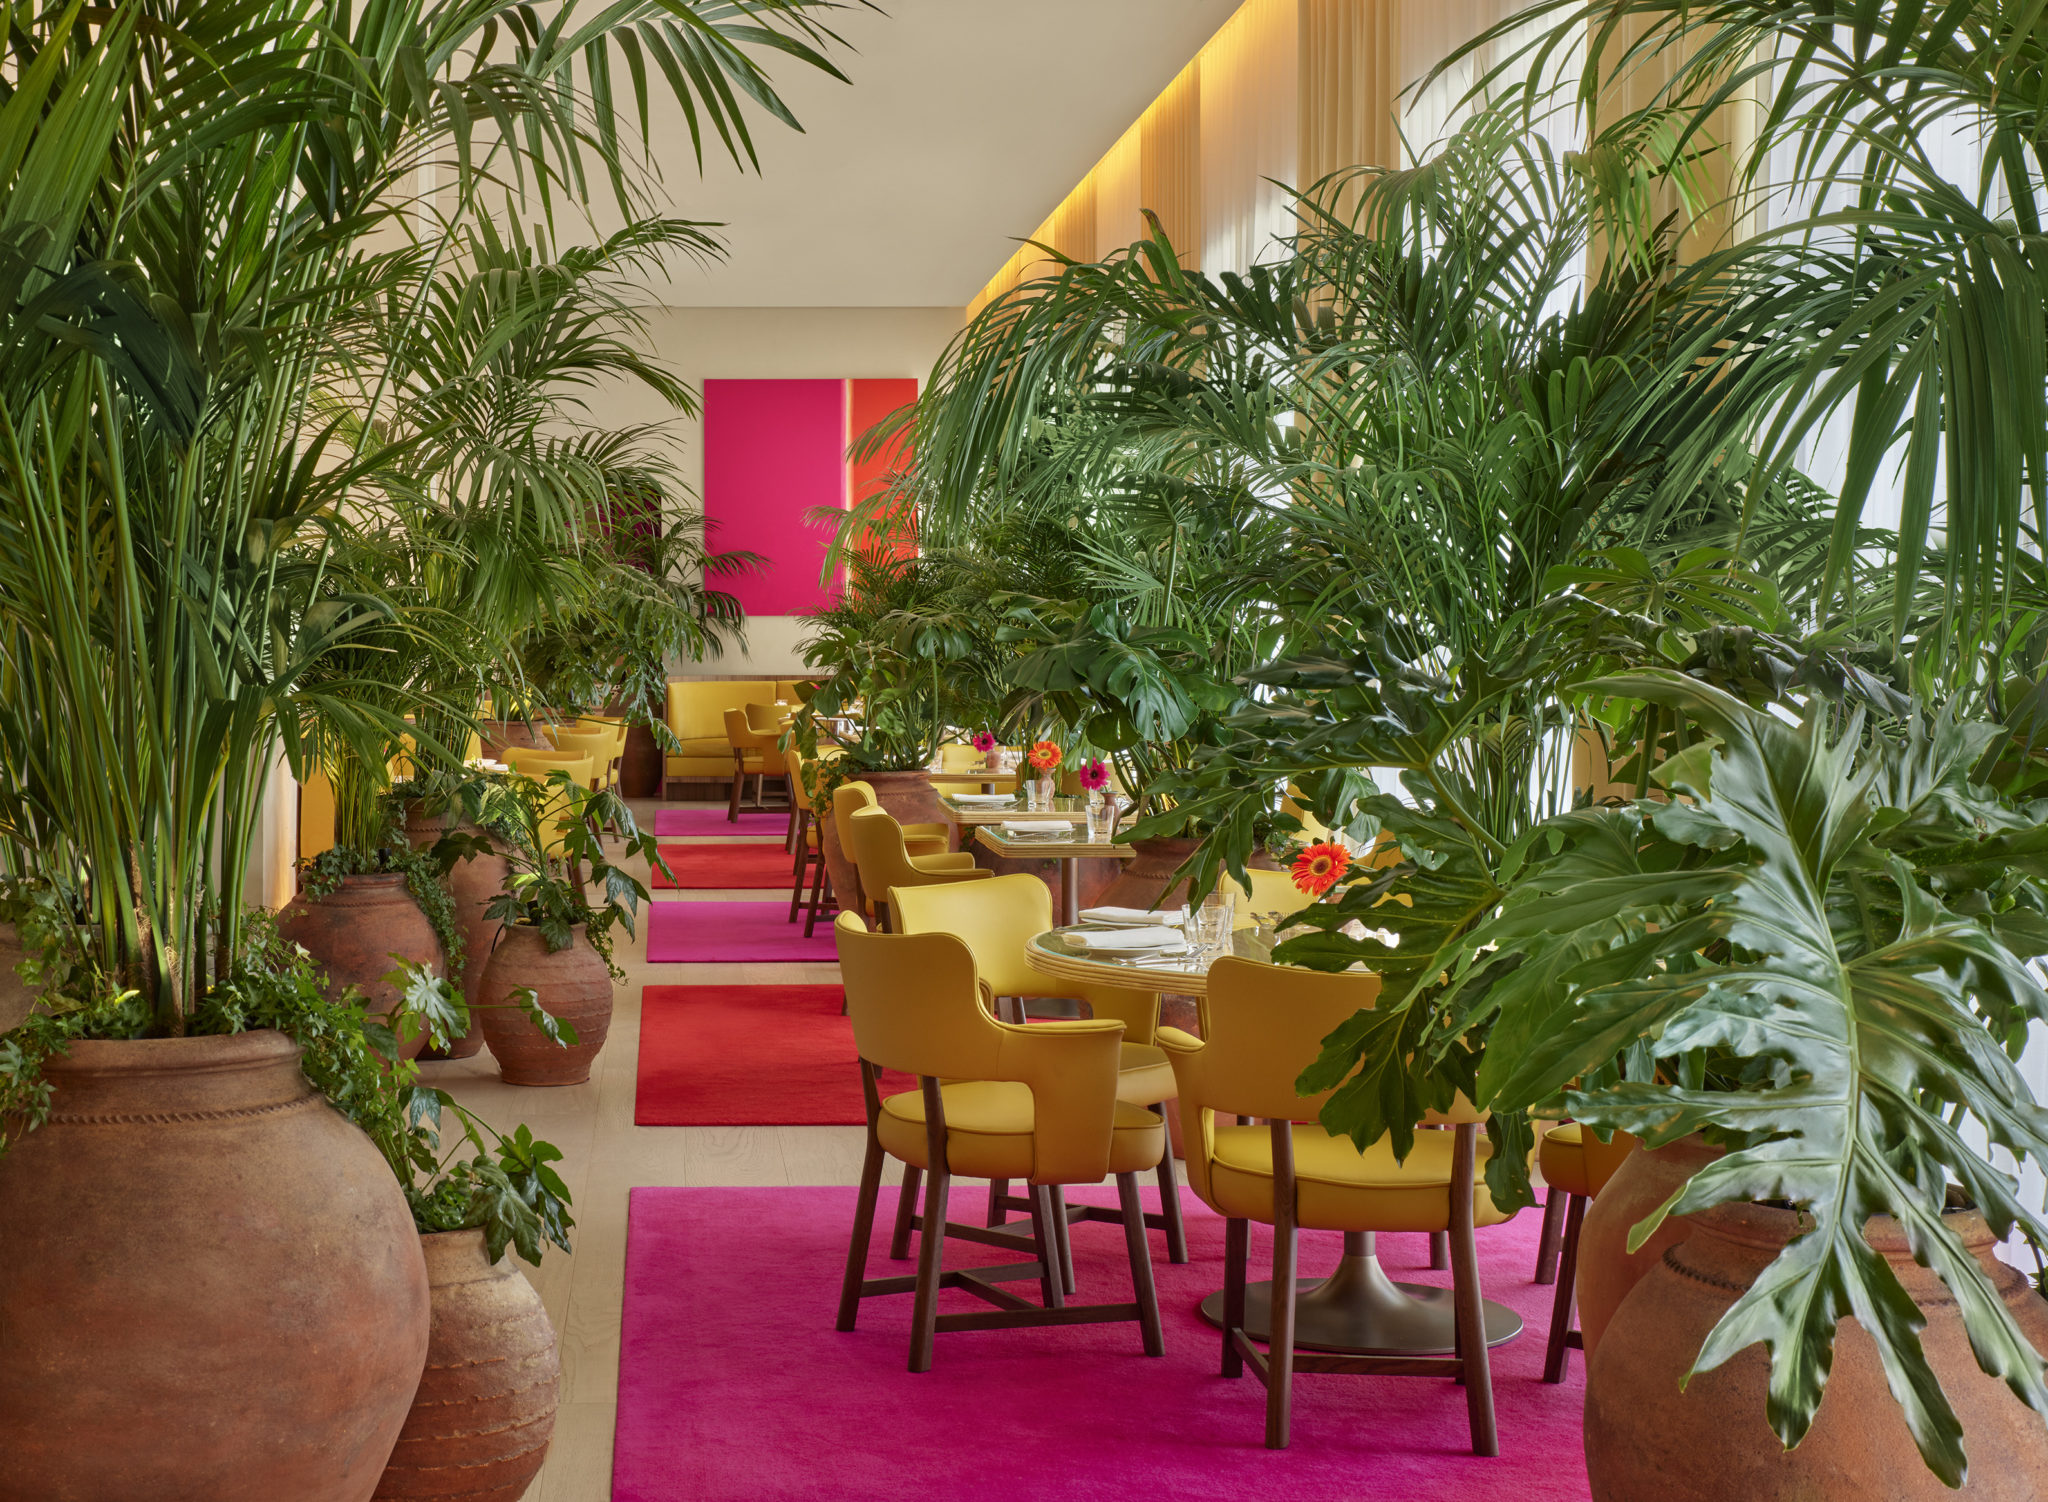 Brightly colored dining room with potted palms